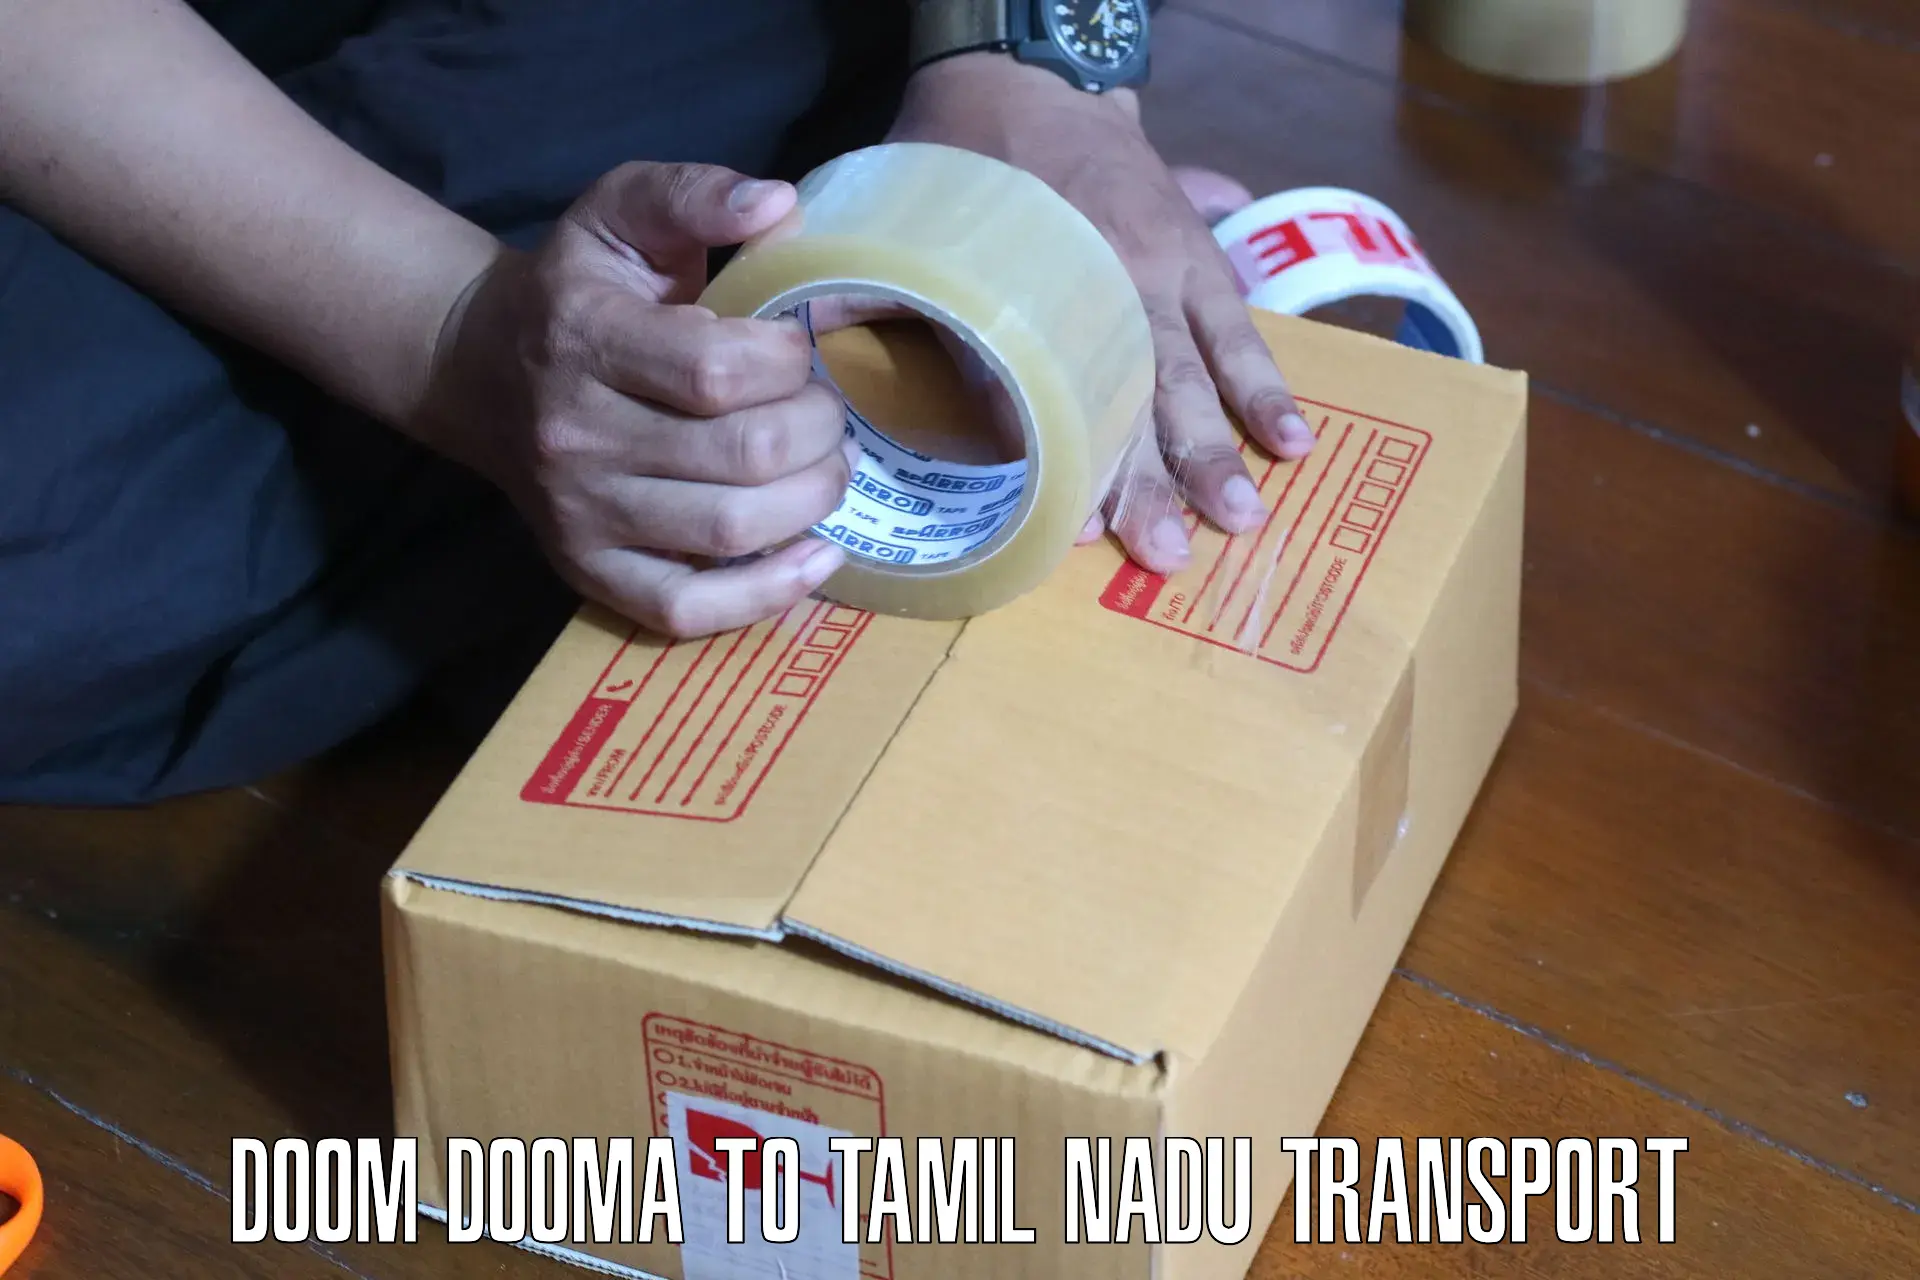 Daily transport service Doom Dooma to Omalur